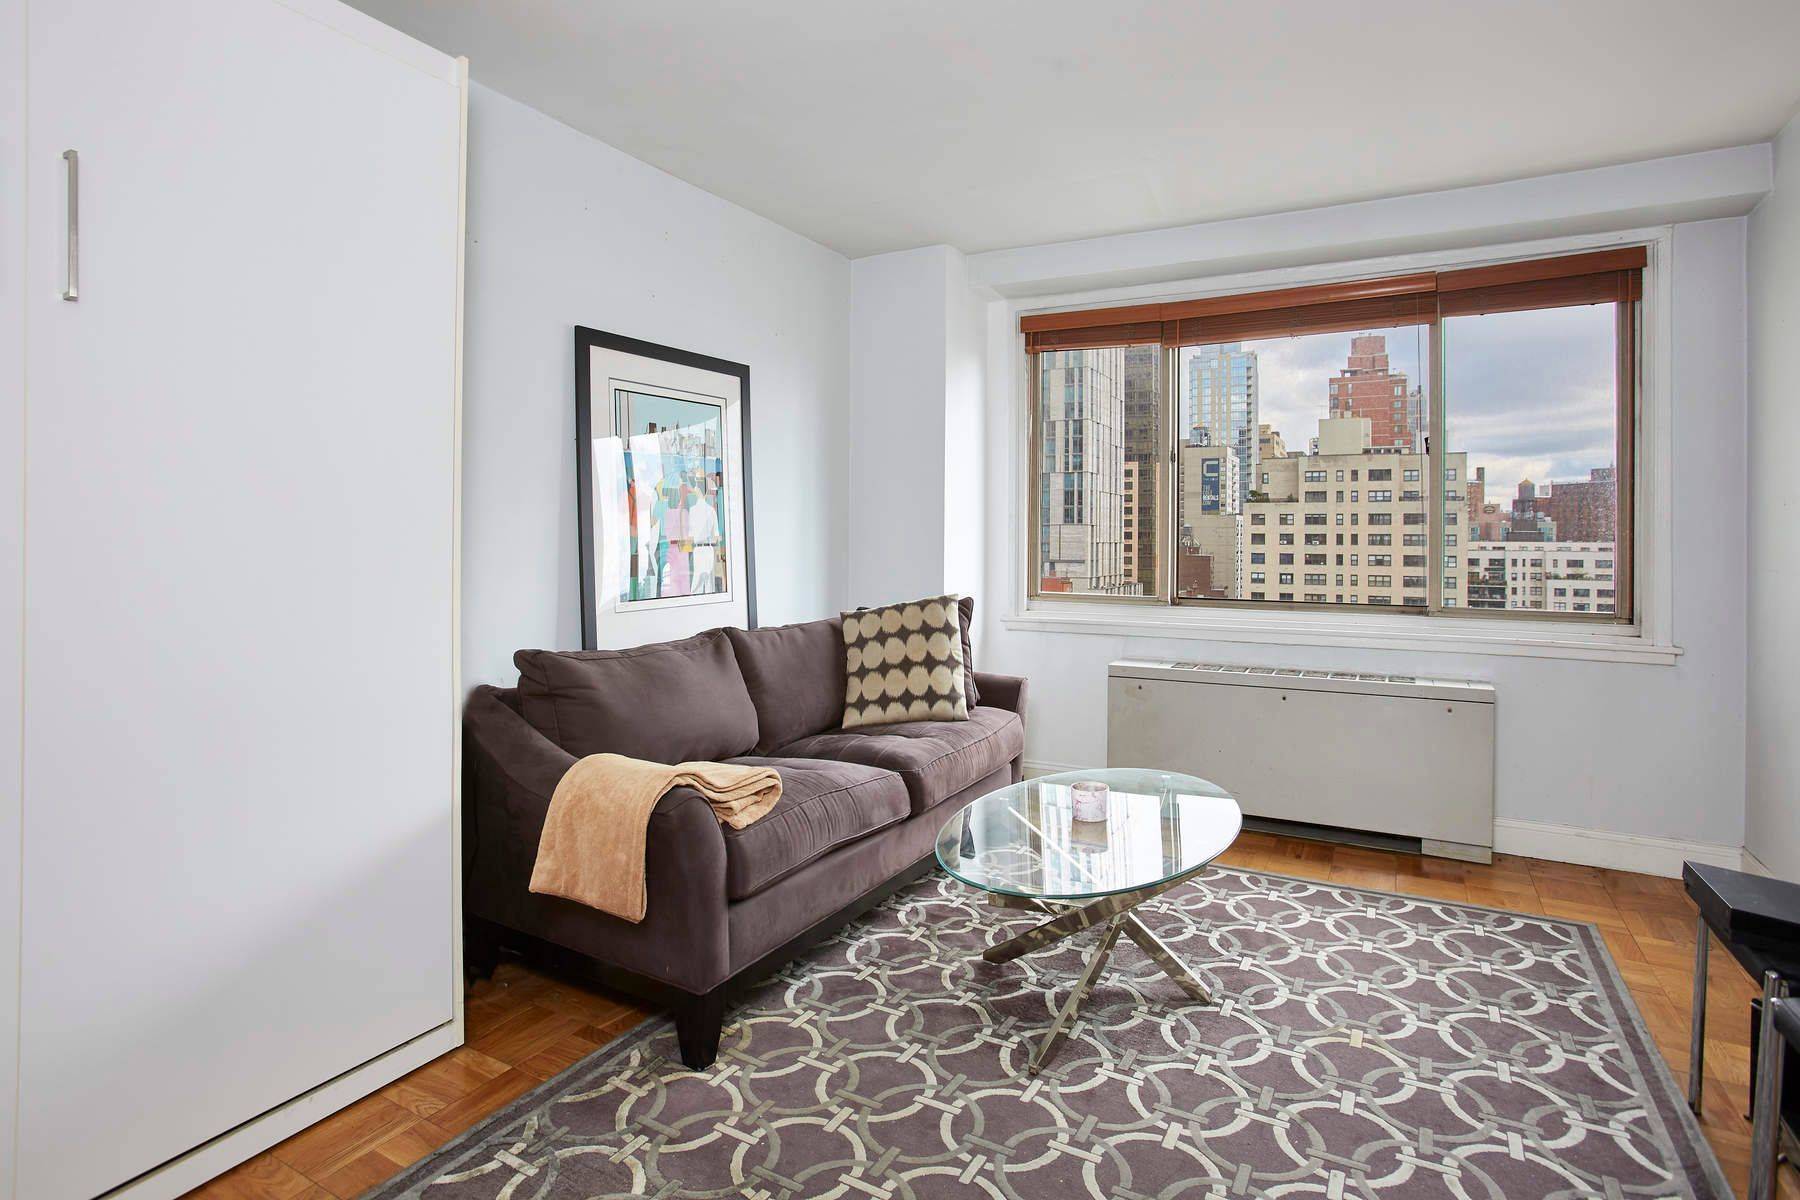 Prime Studio Residence or Pied a Terre a Block from 2nd Ave Subway This bright and cheerful studio features open city views, a recently renovated kitchen with stainless steel appliances, ...